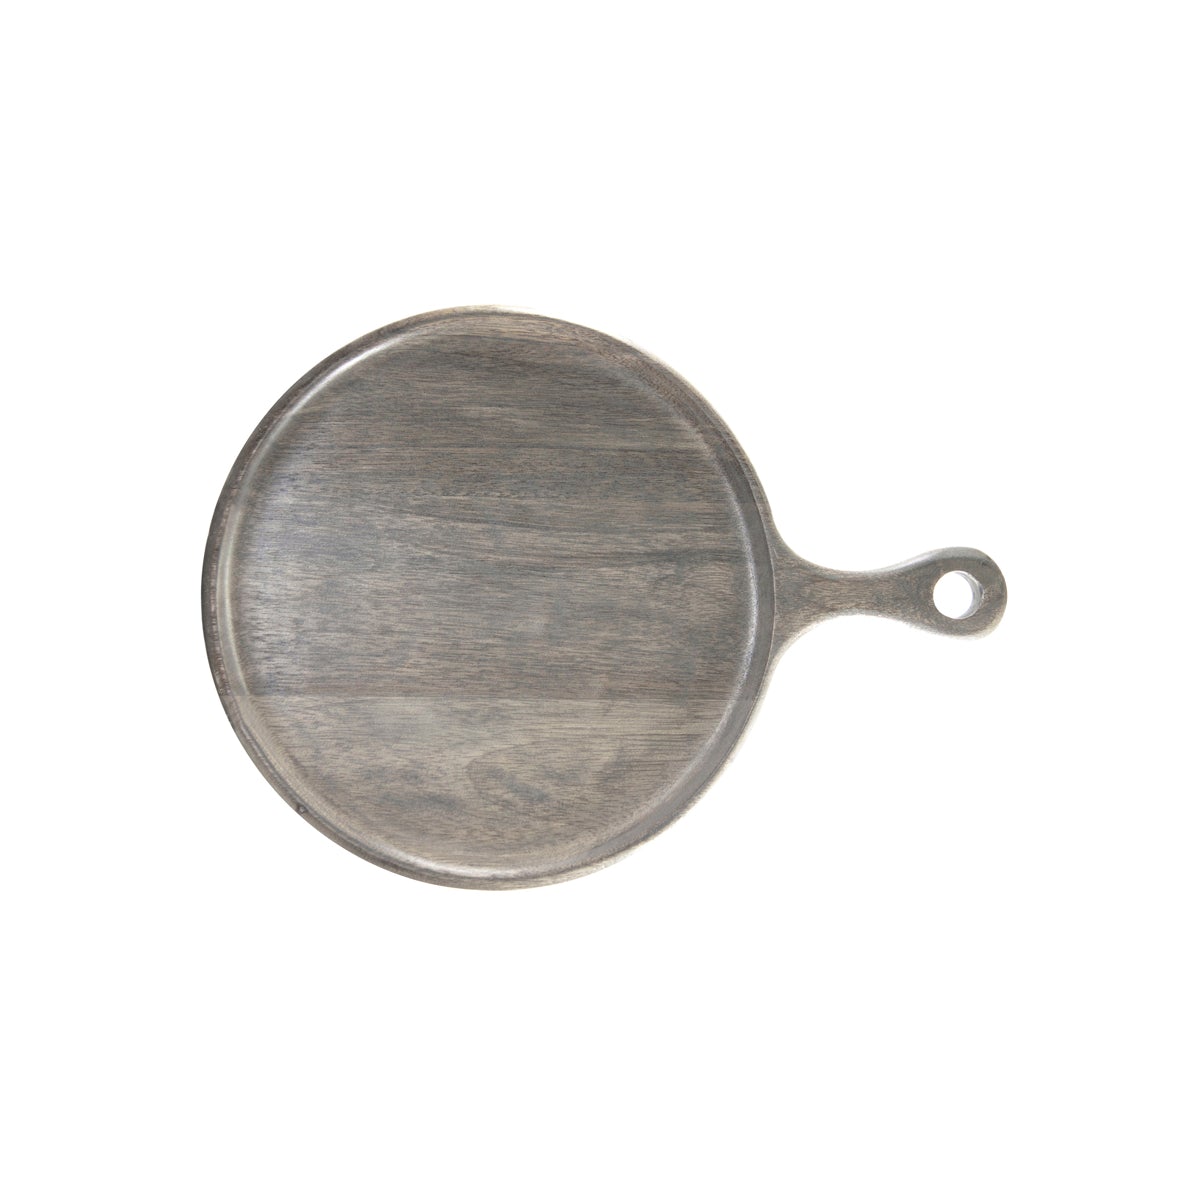 '04844 Chef Inox Mangowood Round Serving Board with Handle Grey 300x15mm Tomkin Australia Hospitality Supplies